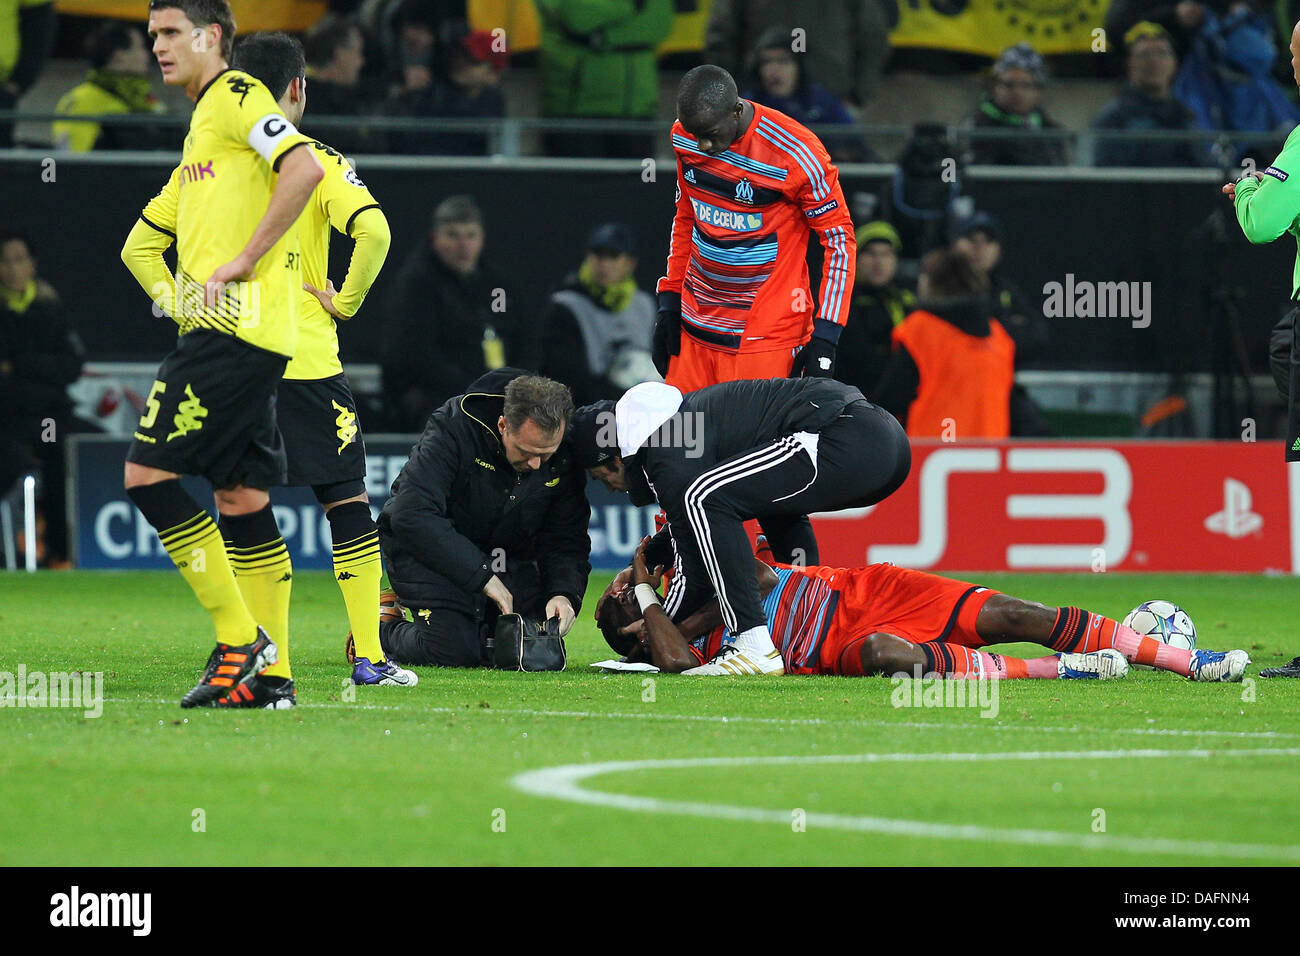 Marseille's Stephane Mbia is treated during the Champions League soccer match between Borussia Dortmund and Olympique Marseille at the Signal Iduna Park in Dortmund, Germany, 06 December 2011. Photo: Revierfoto Stock Photo